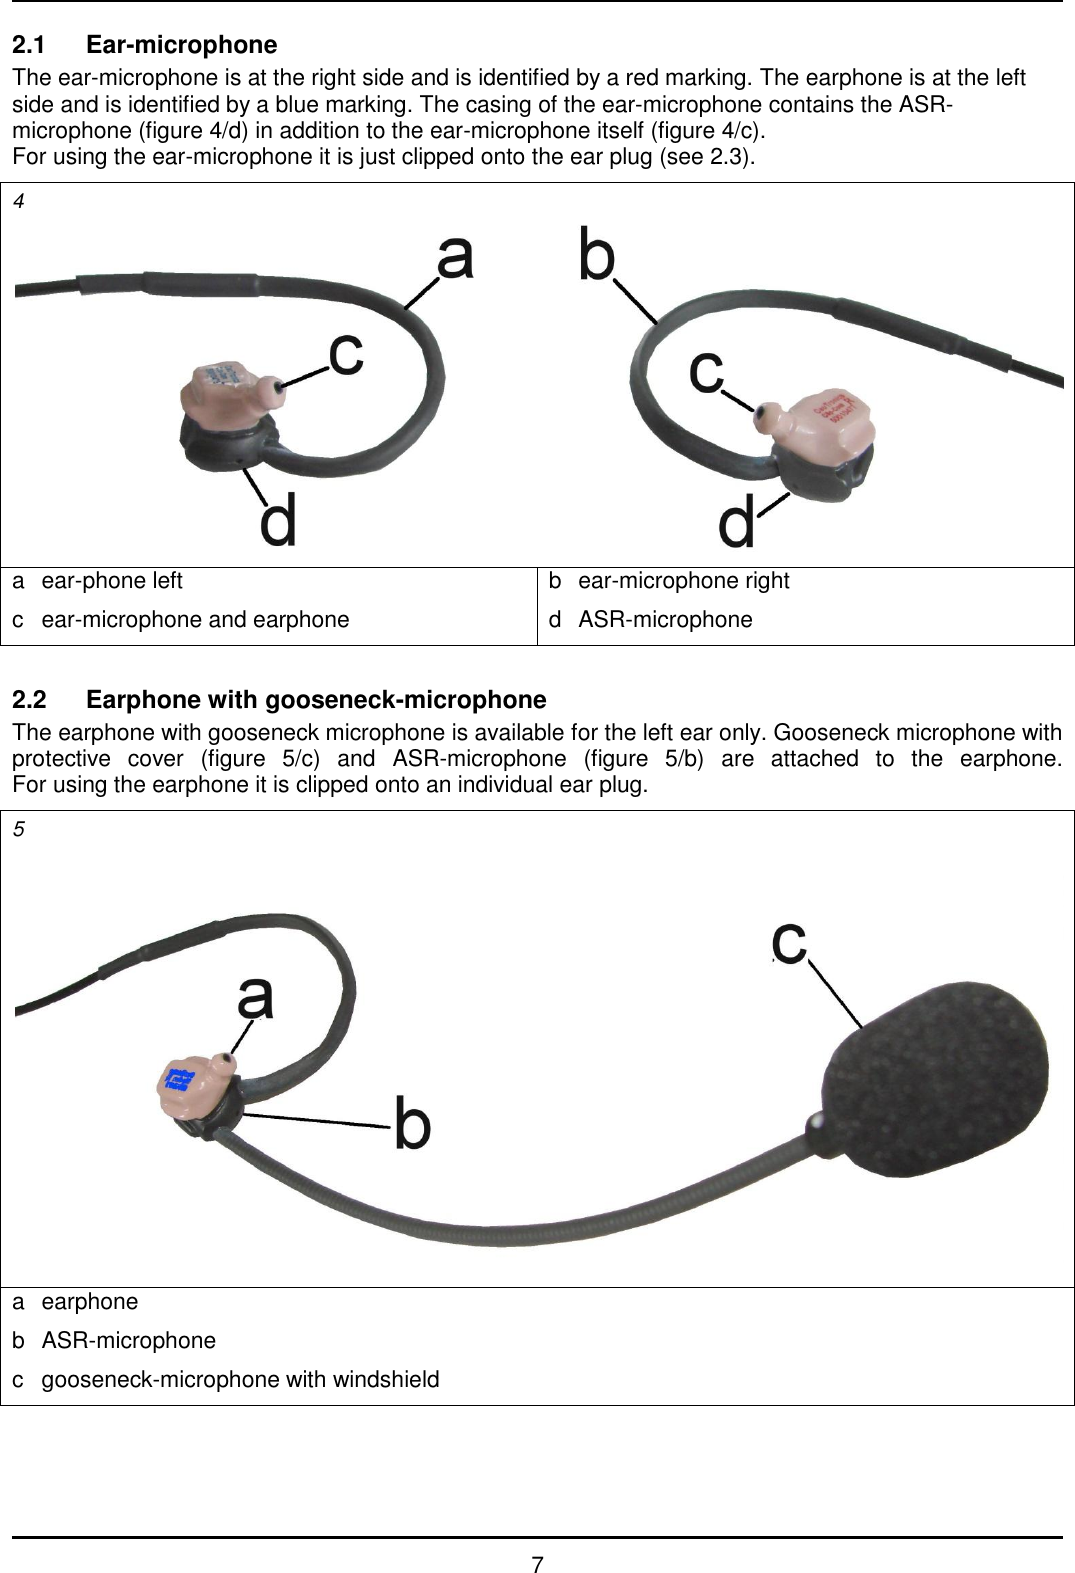   7 2.1  Ear-microphone The ear-microphone is at the right side and is identified by a red marking. The earphone is at the left side and is identified by a blue marking. The casing of the ear-microphone contains the ASR-microphone (figure 4/d) in addition to the ear-microphone itself (figure 4/c). For using the ear-microphone it is just clipped onto the ear plug (see 2.3). 4  a  ear-phone left c  ear-microphone and earphone b  ear-microphone right d  ASR-microphone  2.2  Earphone with gooseneck-microphone The earphone with gooseneck microphone is available for the left ear only. Gooseneck microphone with protective  cover  (figure  5/c)  and  ASR-microphone  (figure  5/b)  are  attached  to  the  earphone. For using the earphone it is clipped onto an individual ear plug. 5  a  earphone b  ASR-microphone c  gooseneck-microphone with windshield  